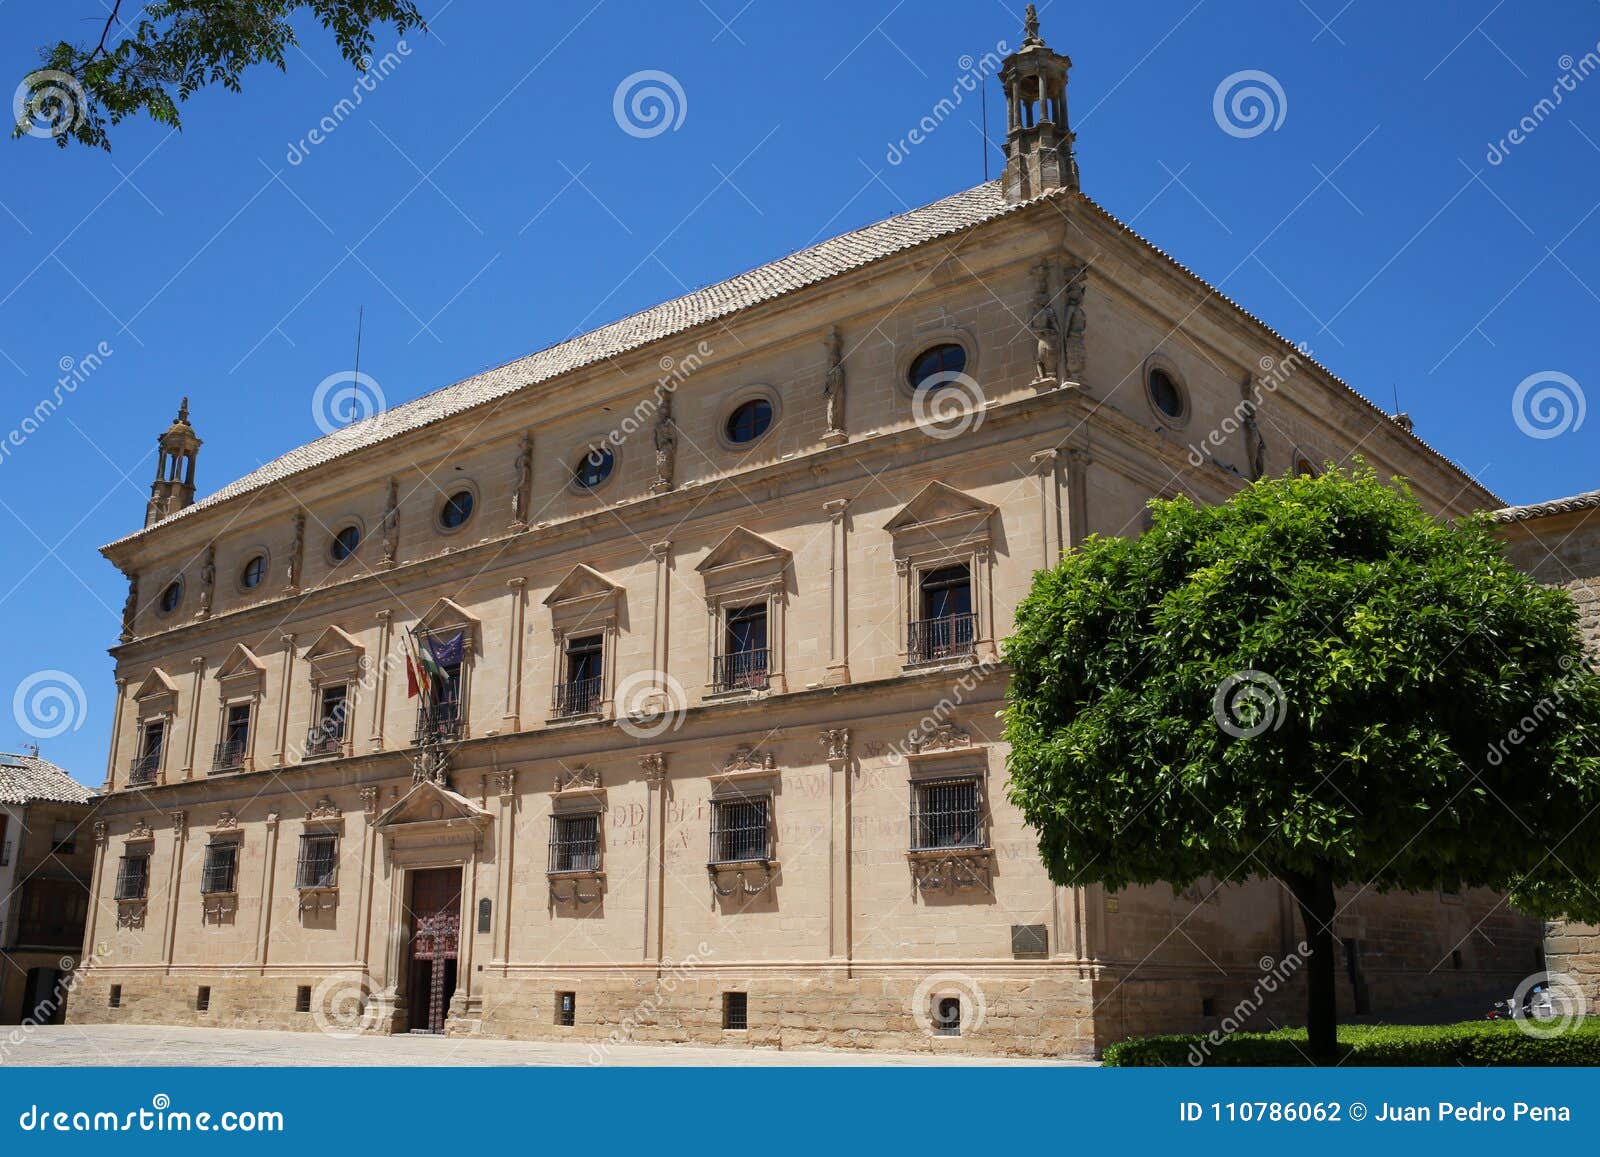 vazquez de molina palace in the city of ubeda andalusia